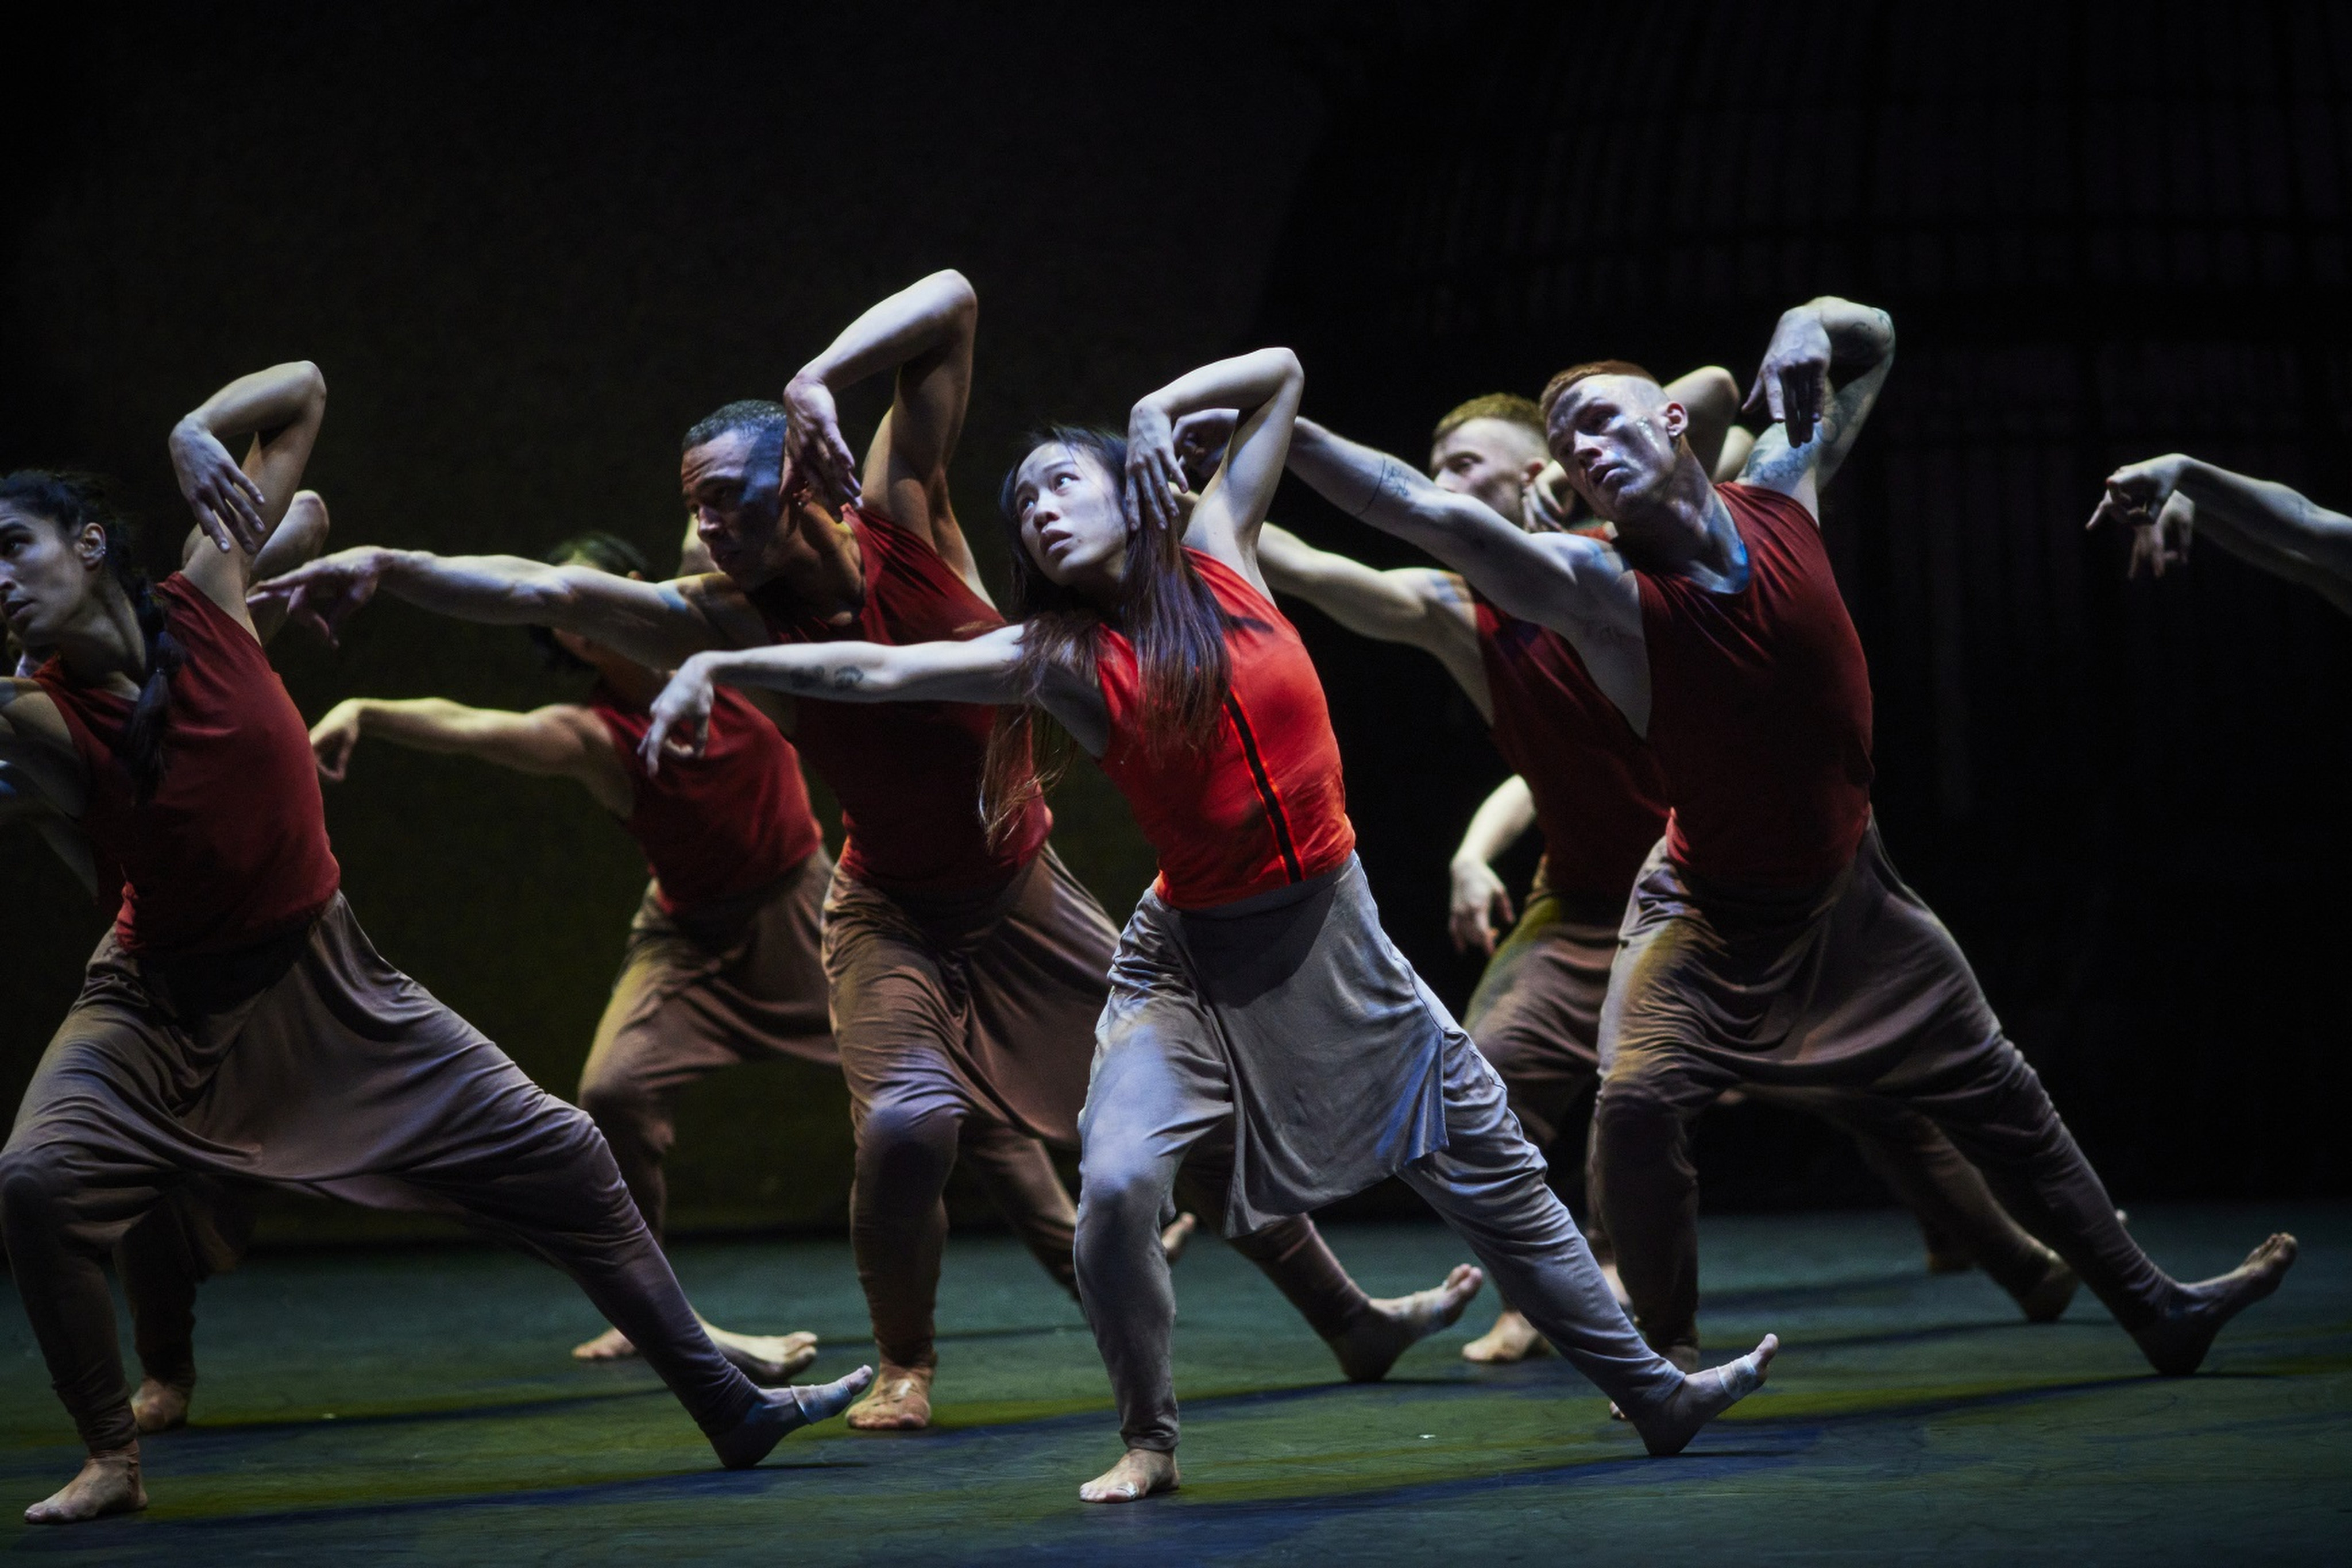 Jungle Book Reimagined is a work by the Akram Khan Company, which has returned to Hong Kong after three years away. Photo: Ambra Vernuccio